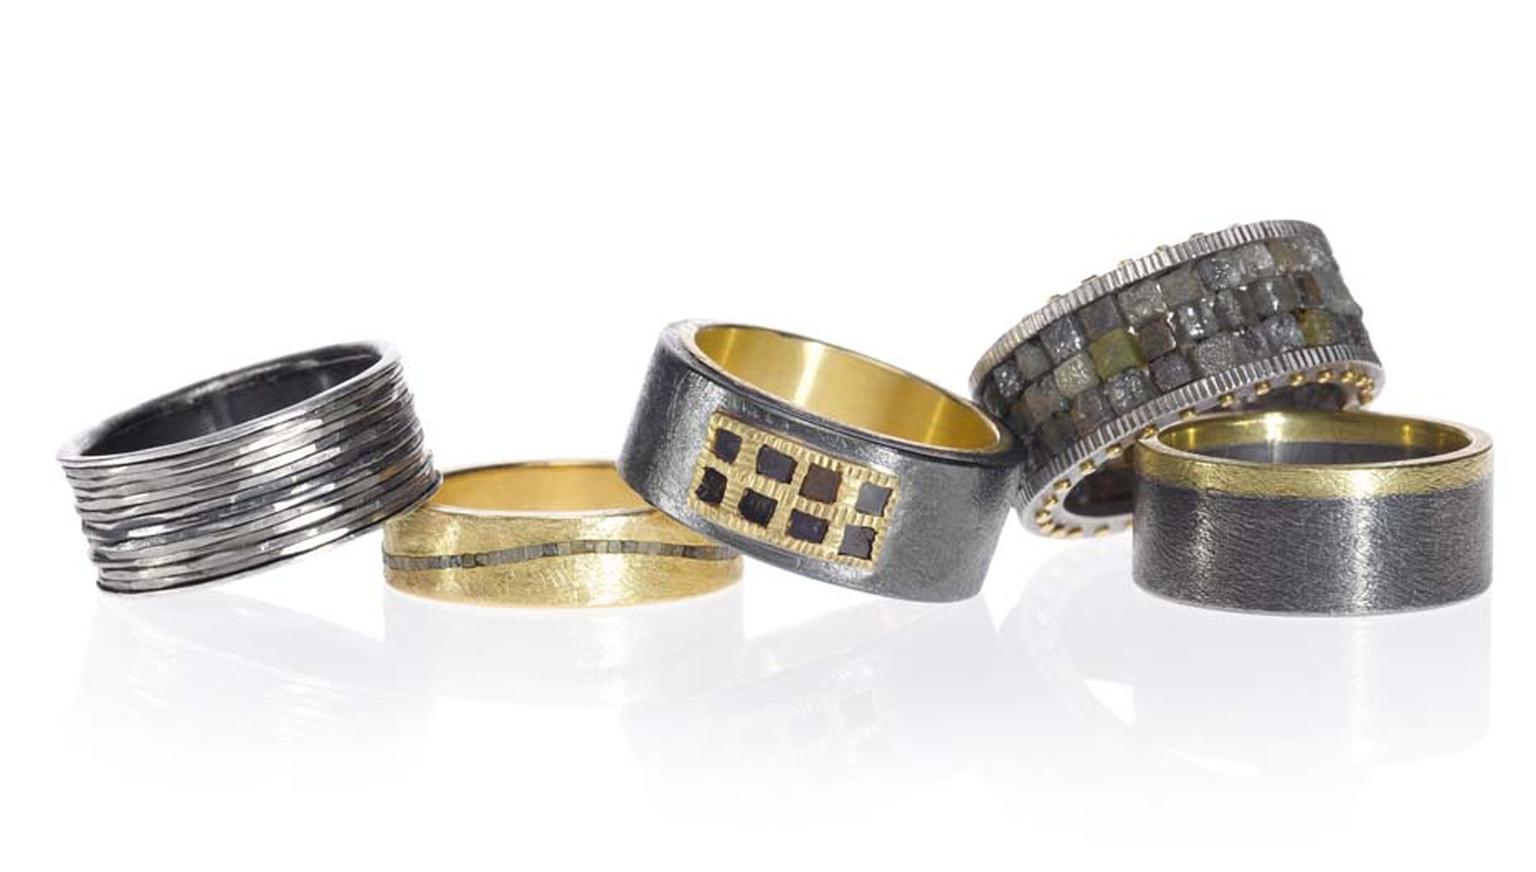 Todd Reed's new Men's Jewelry Collection features more than 600 pieces including belt buckles, rings, bracelets and dog tags as well as the more traditional men’s accessory, the cufflink.